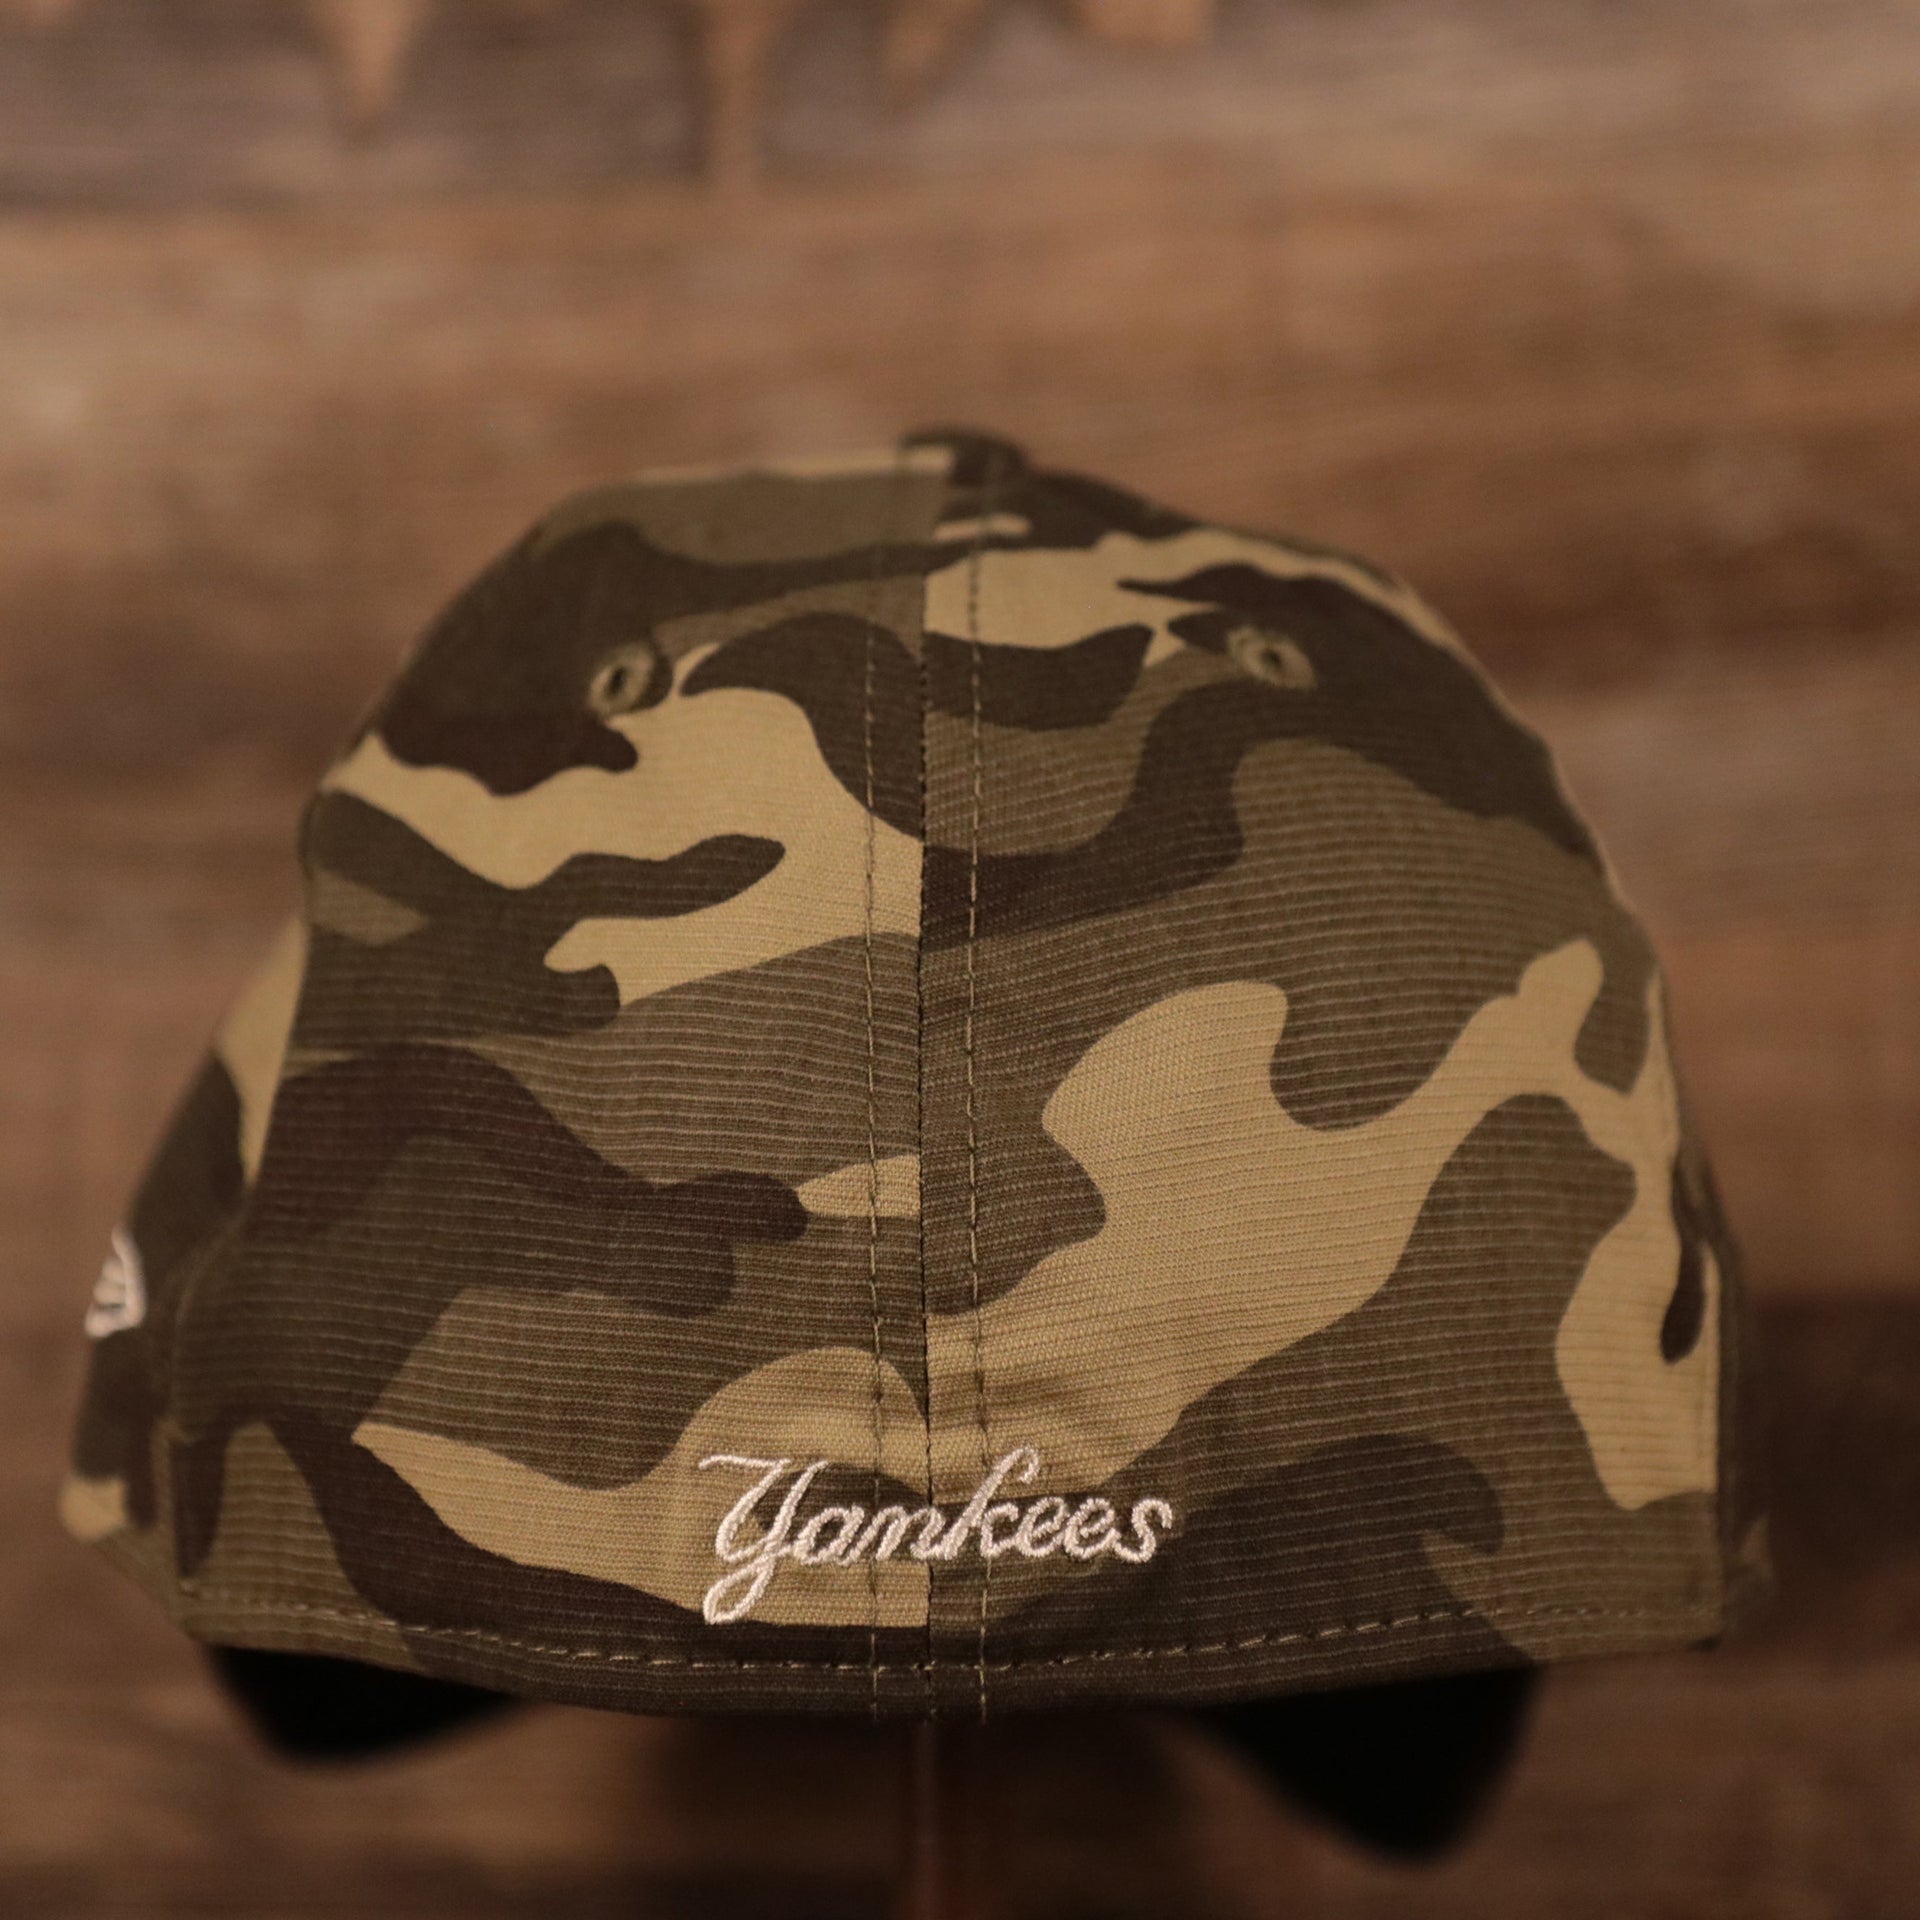 Yankees written on the back of the Armed Forces Day 2021 3930 flexfit cap by New Era.